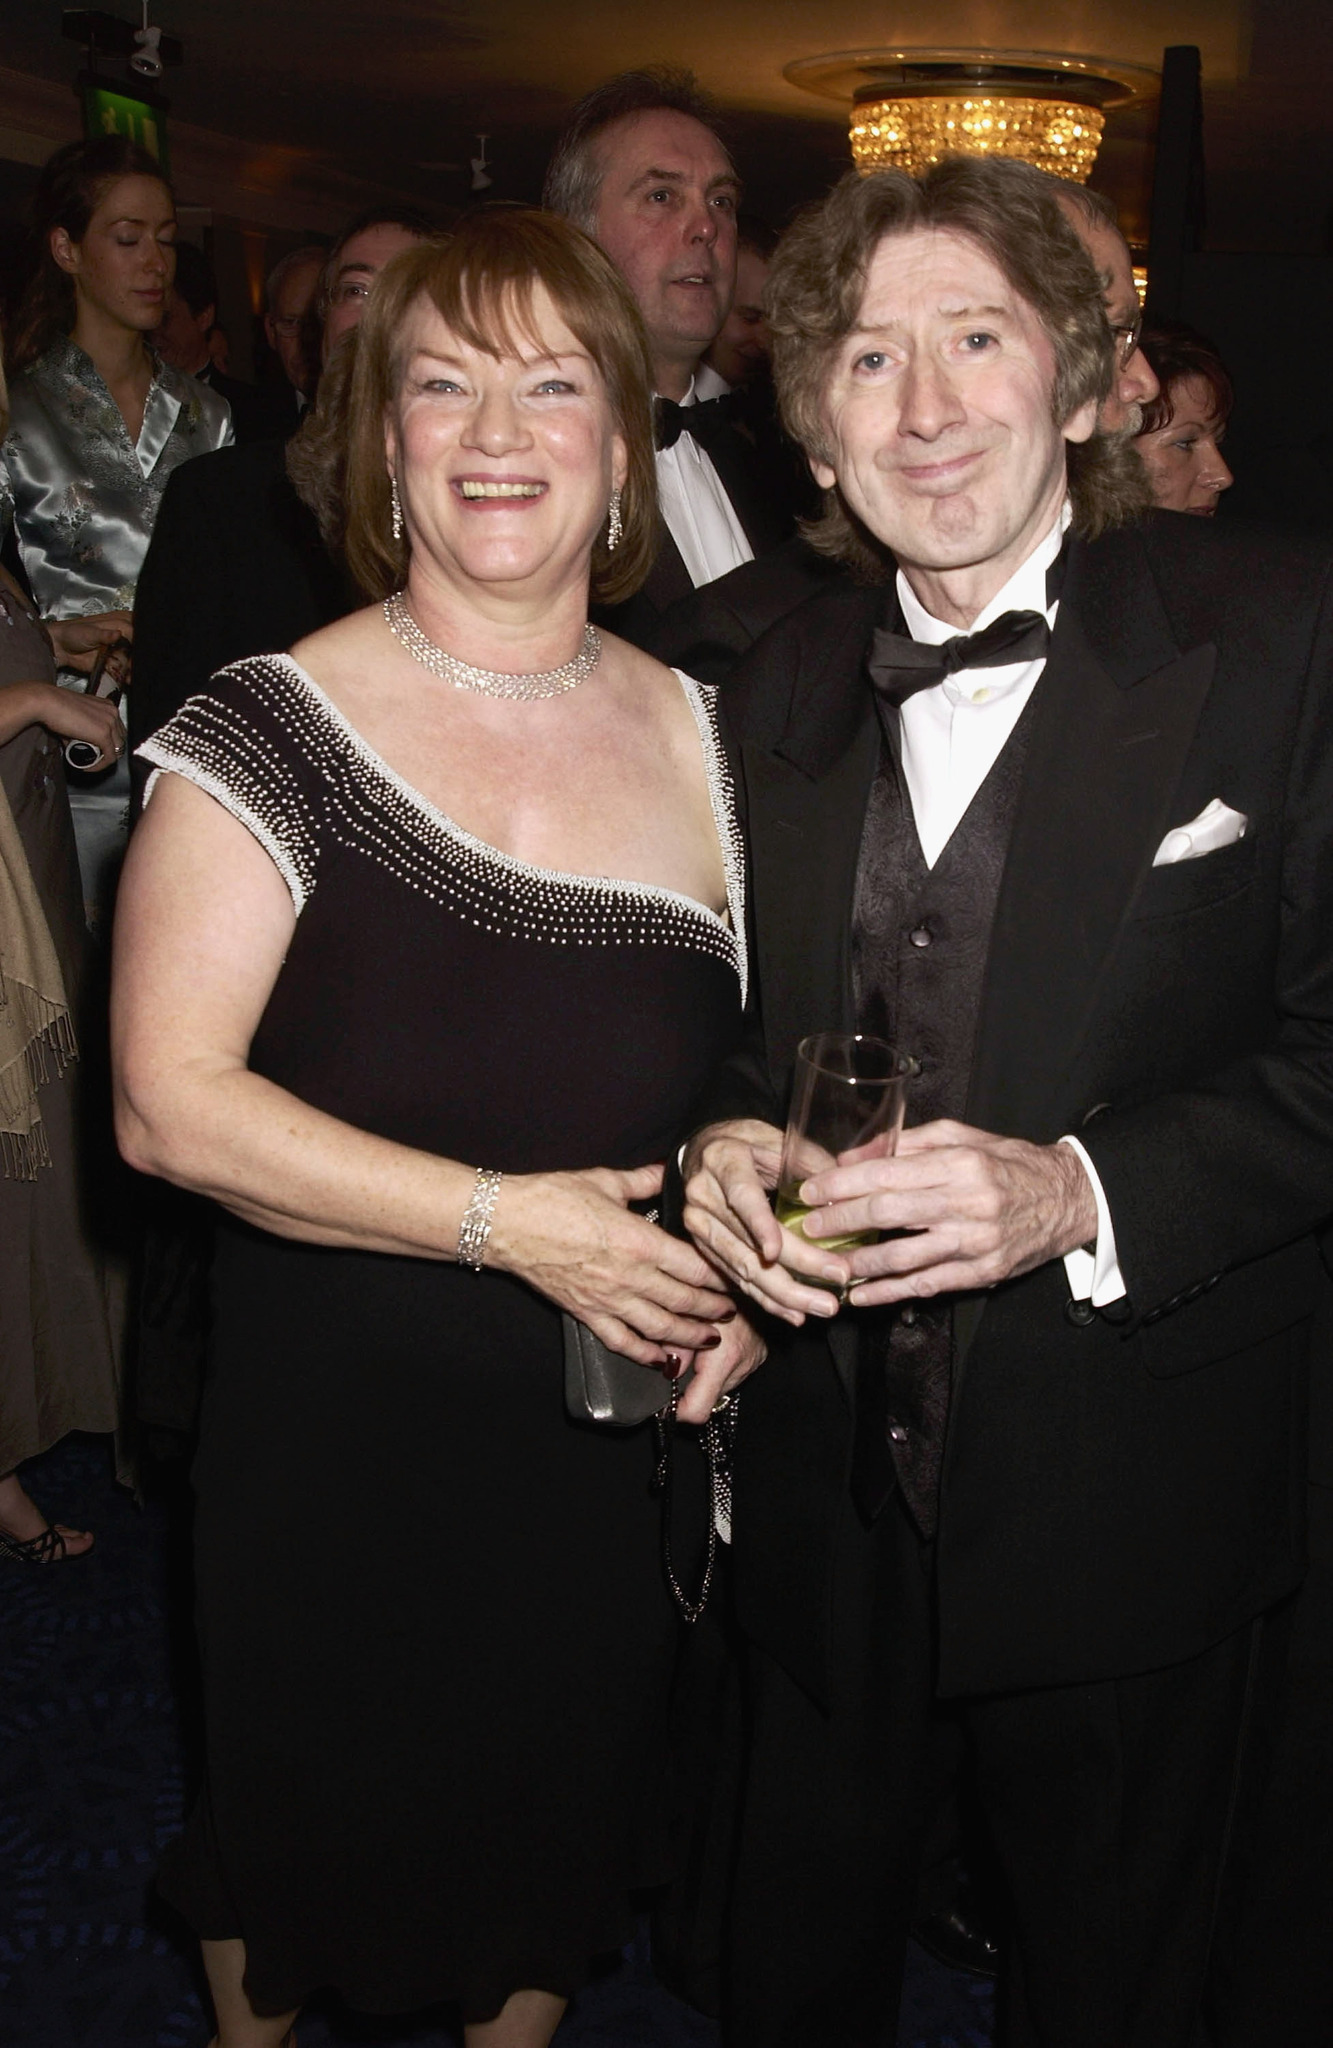 James Herbert and wife attend the British Book Awards held at the Grosvenor House Hotel on February 24, 2003 in London.